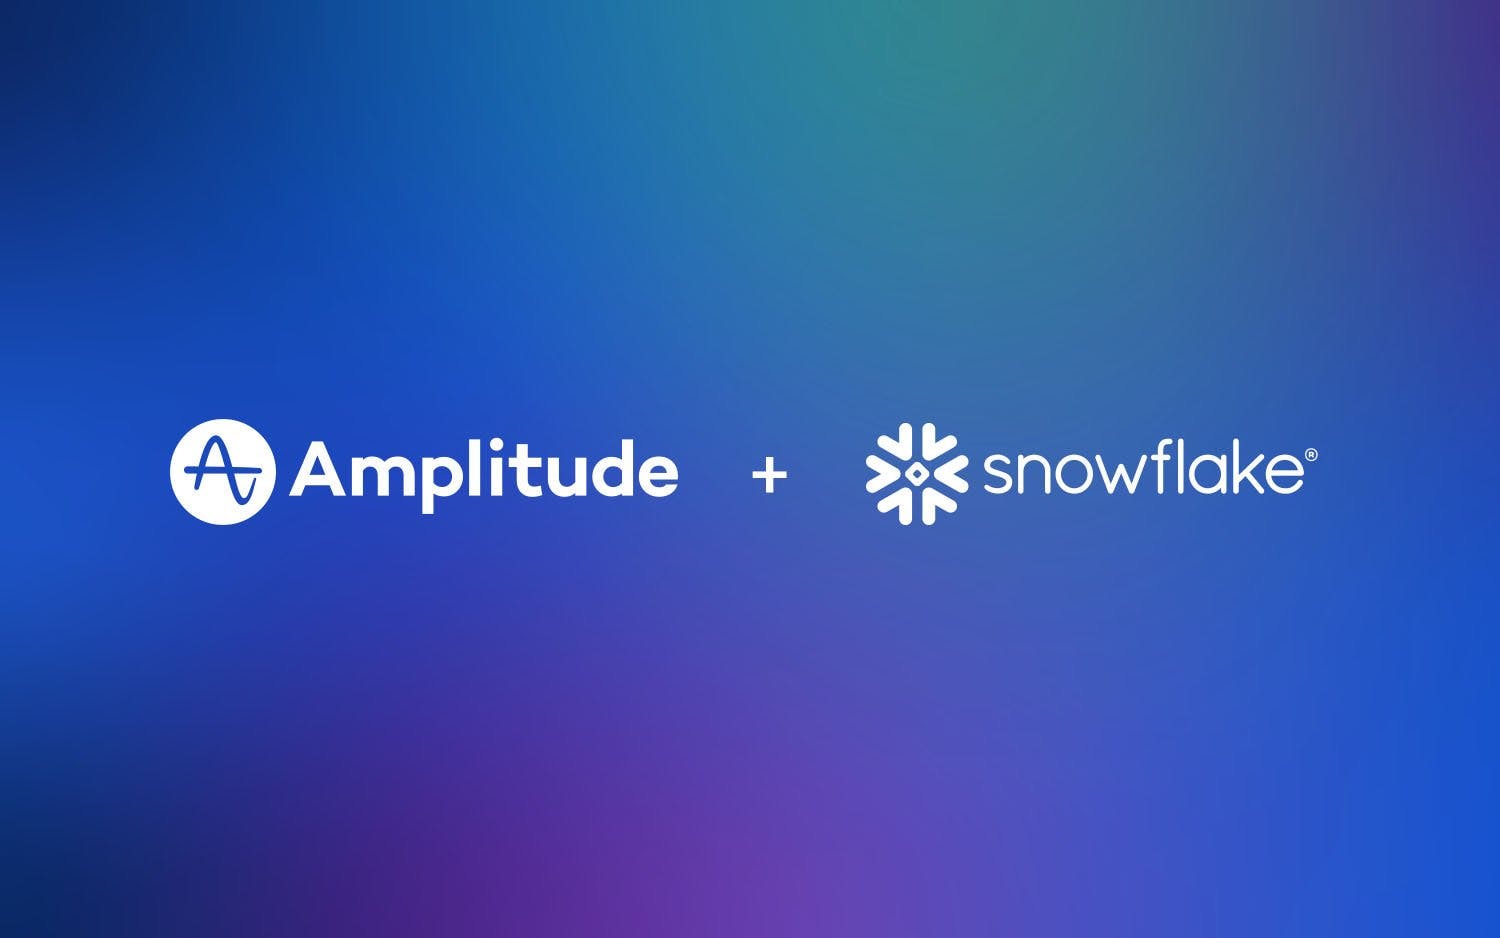 Delivering Flexibility And Choice With Amplitude + Snowflake Datashare